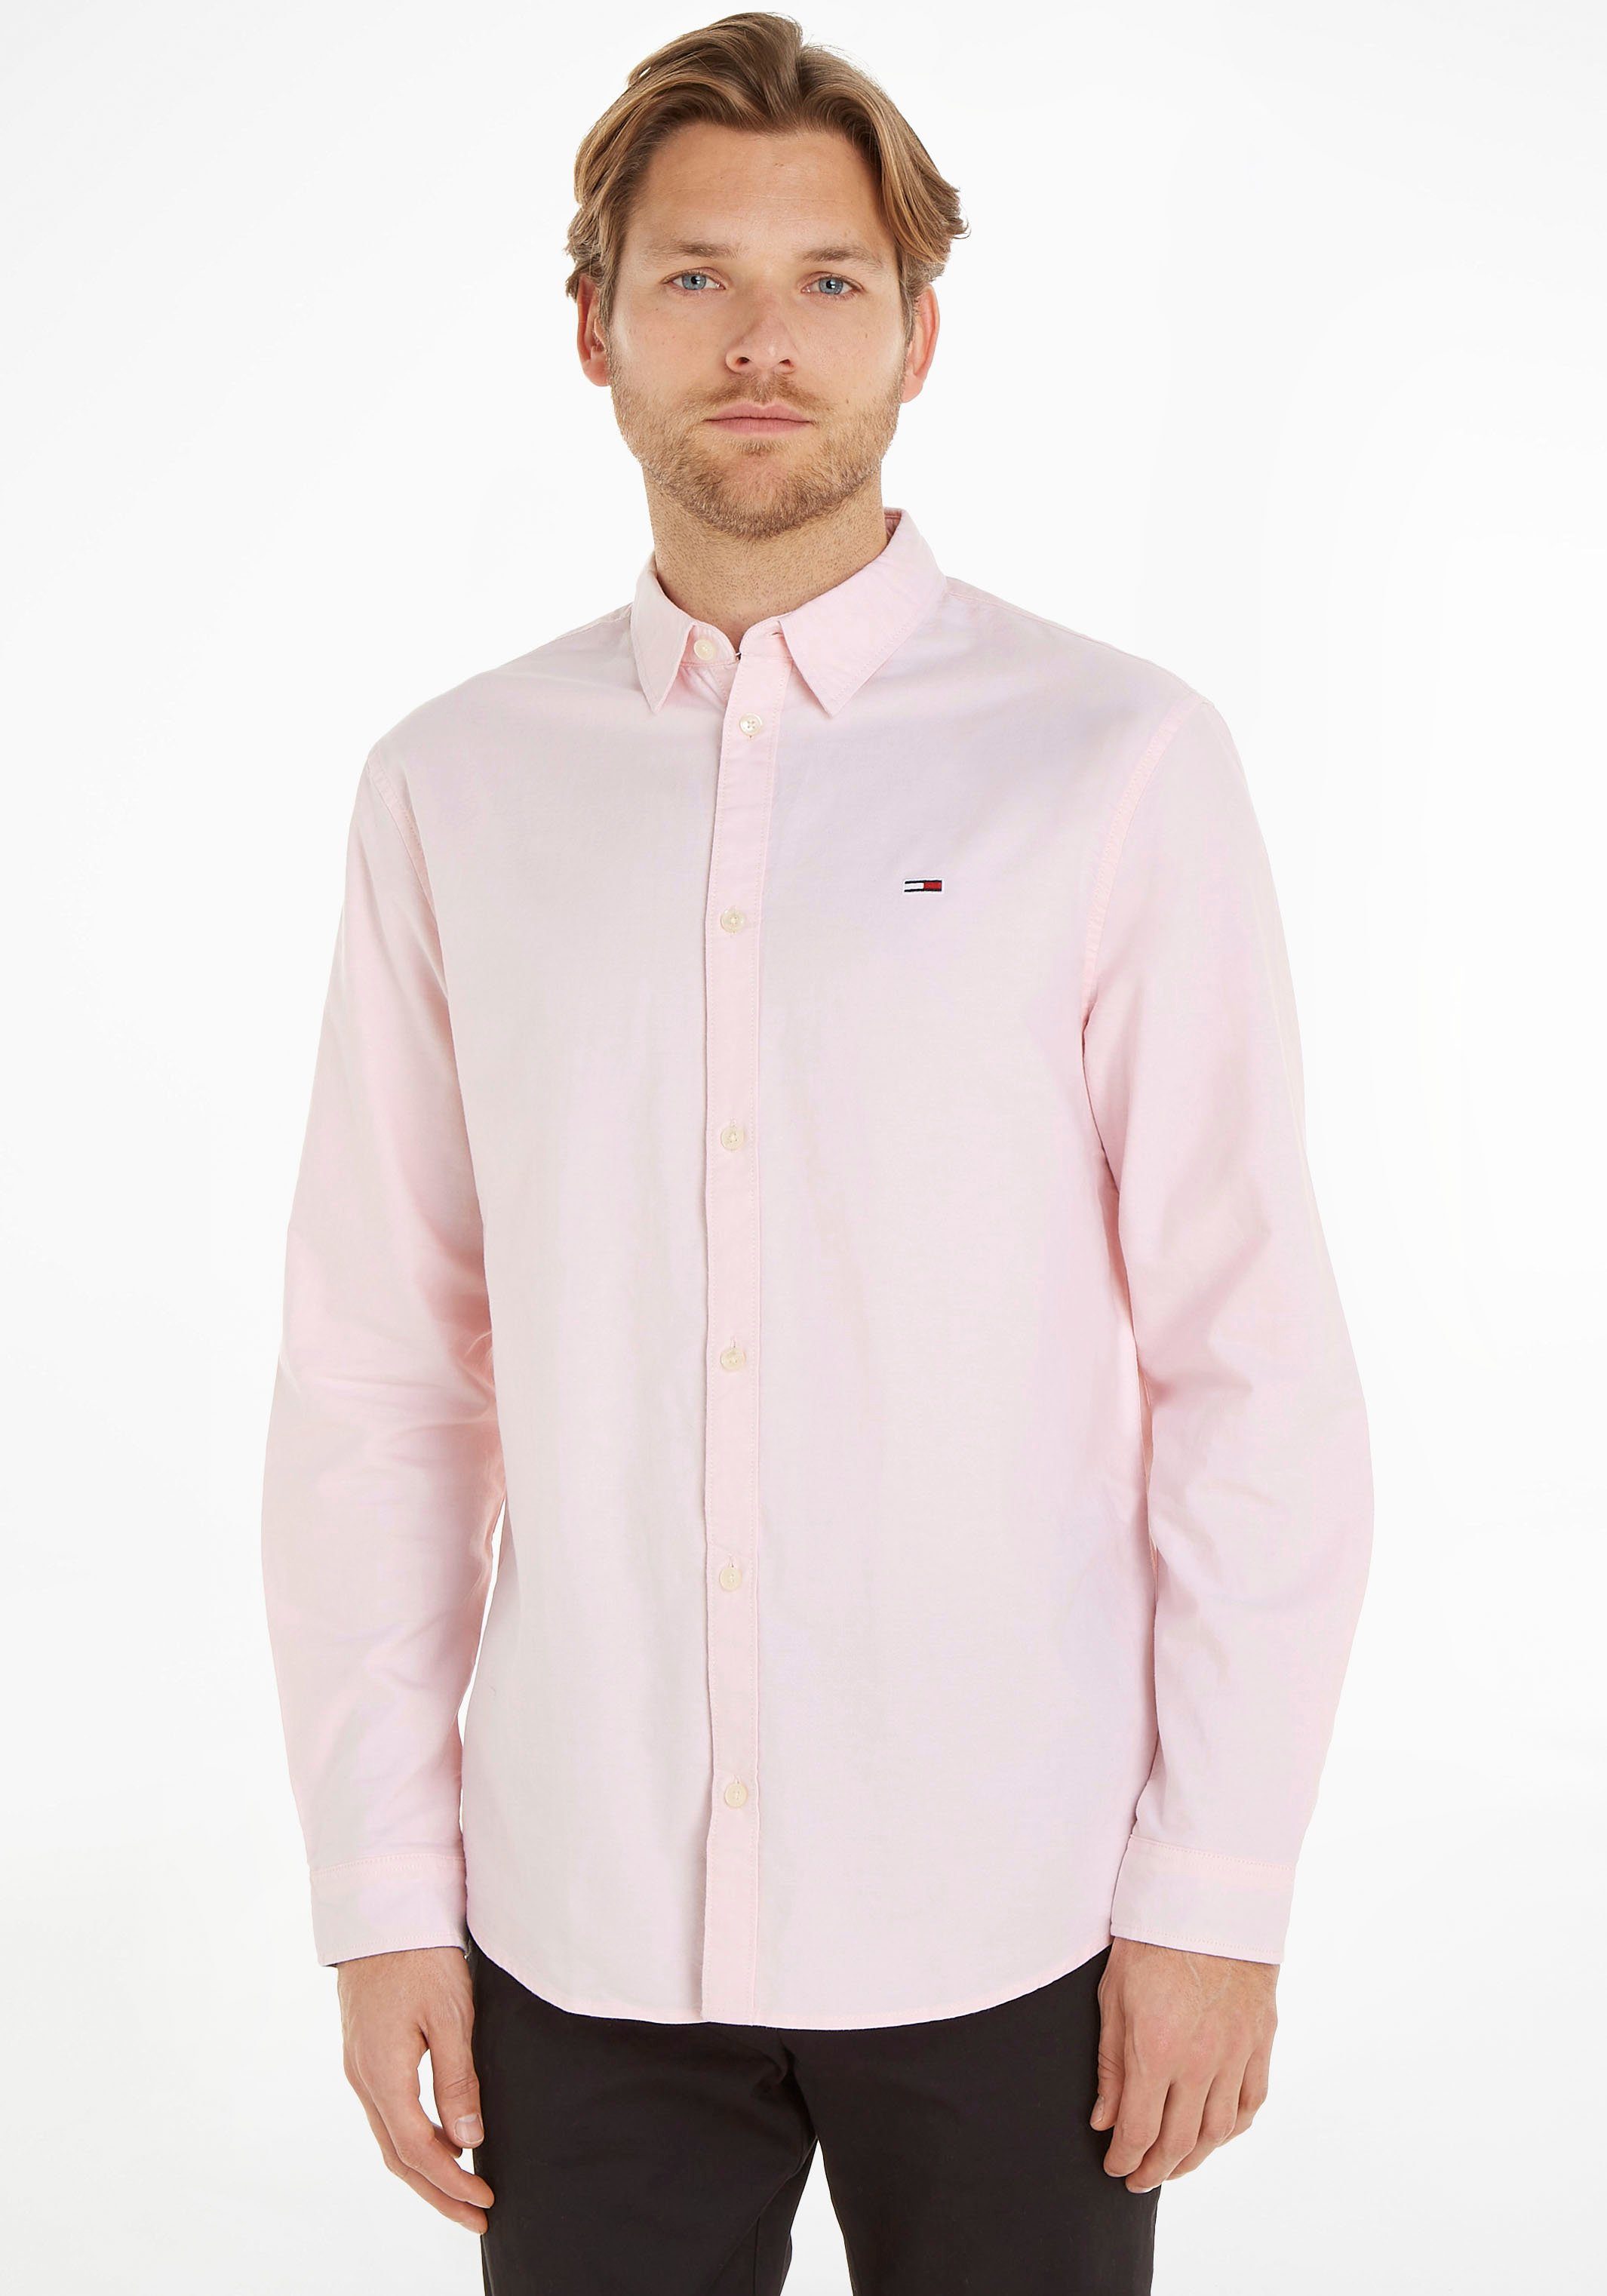 Tommy Jeans Langarmhemd TJM CLASSIC pink SHIRT mit Knopfleiste OXFORD